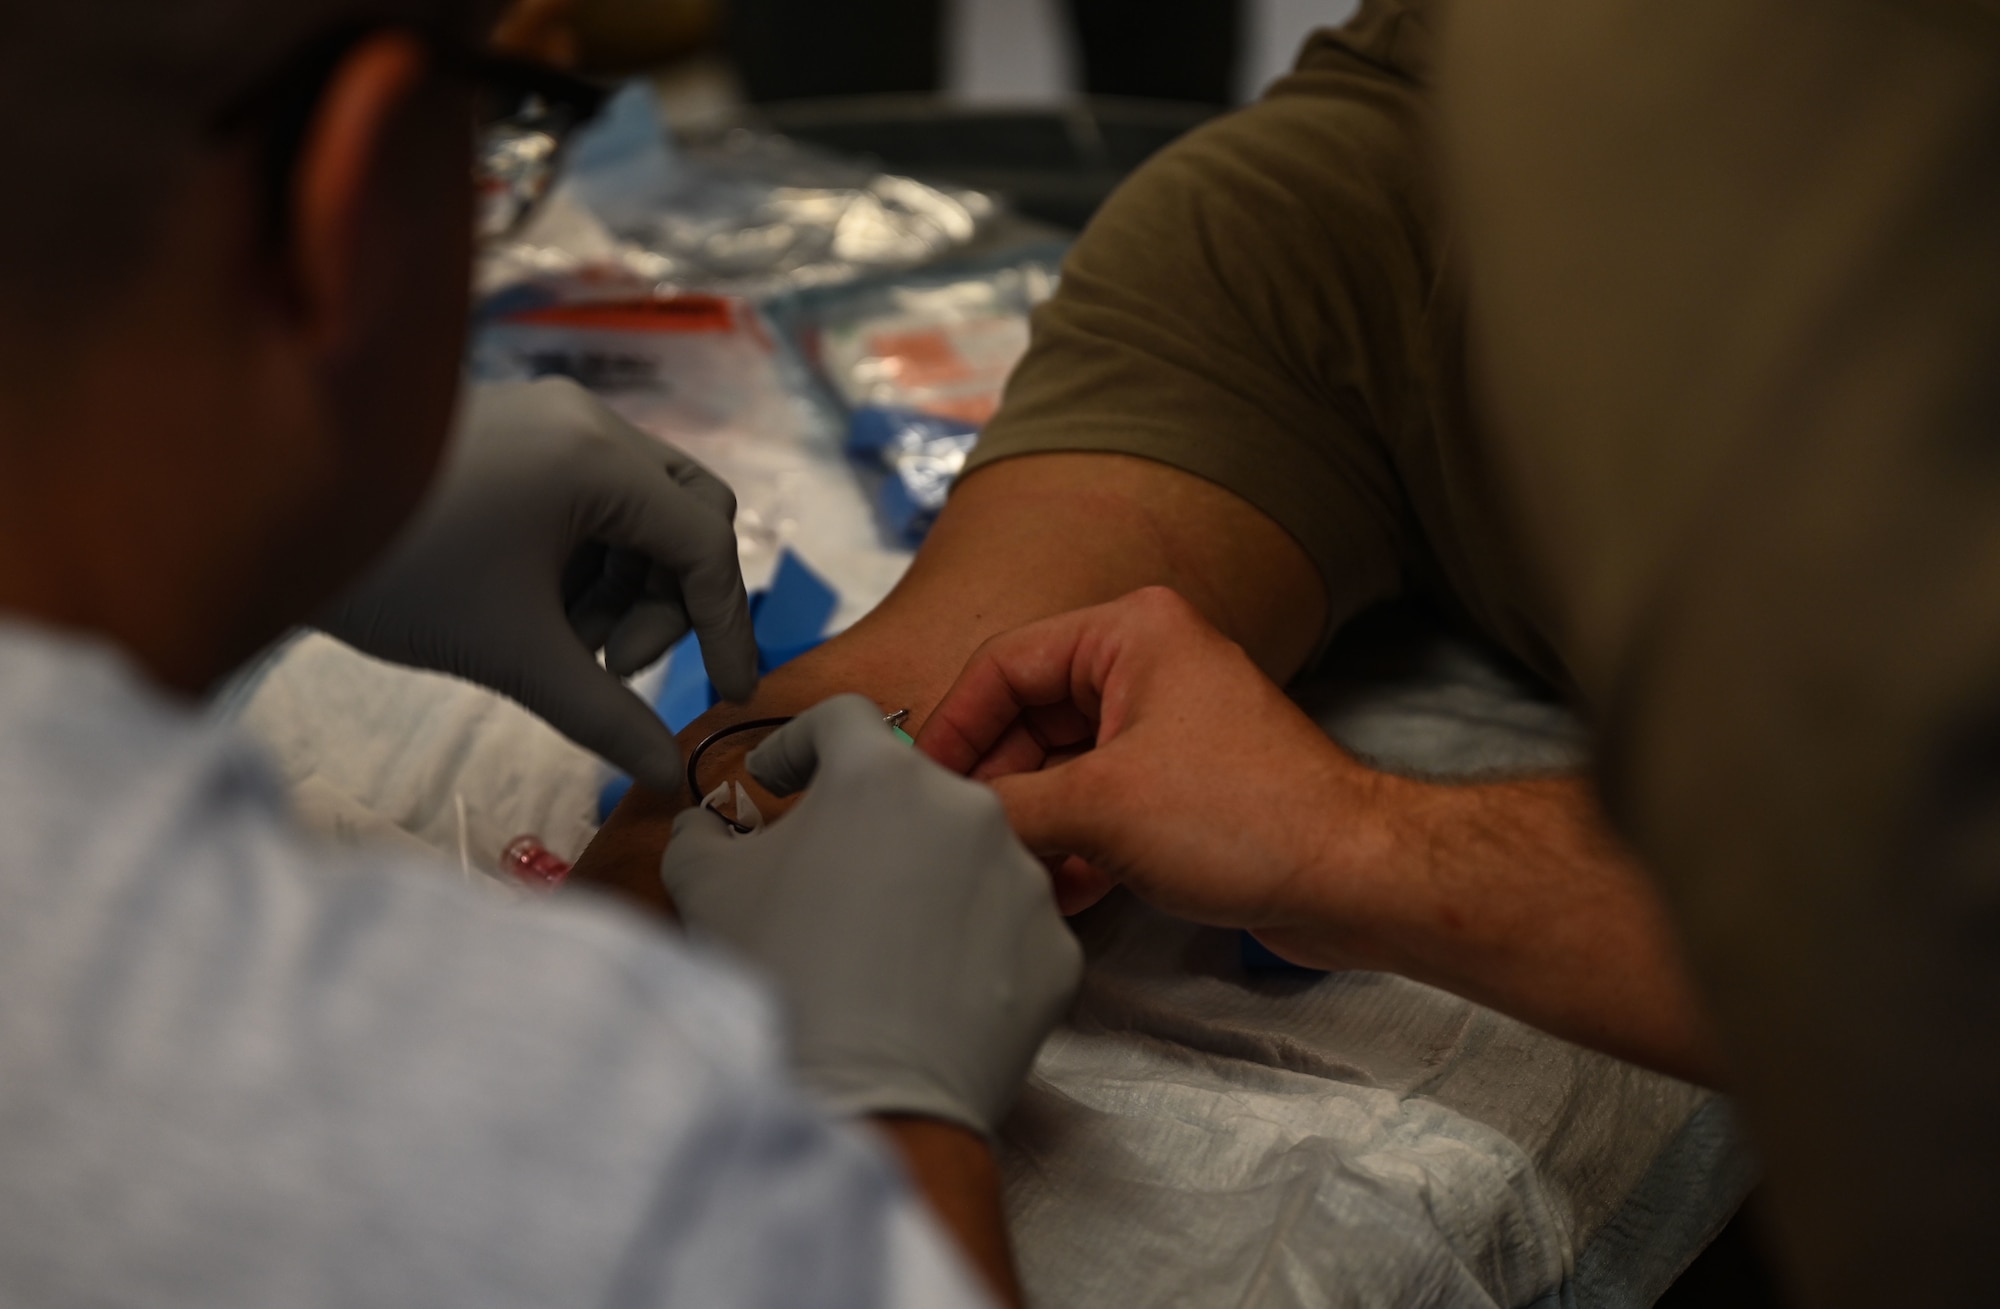 U.S. Airmen from the 633d Medical Group perform intravenous access during the Comprehensive Medical Readiness Training exercise at Joint Base Langley-Eustis, Virginia, July 28, 2022.